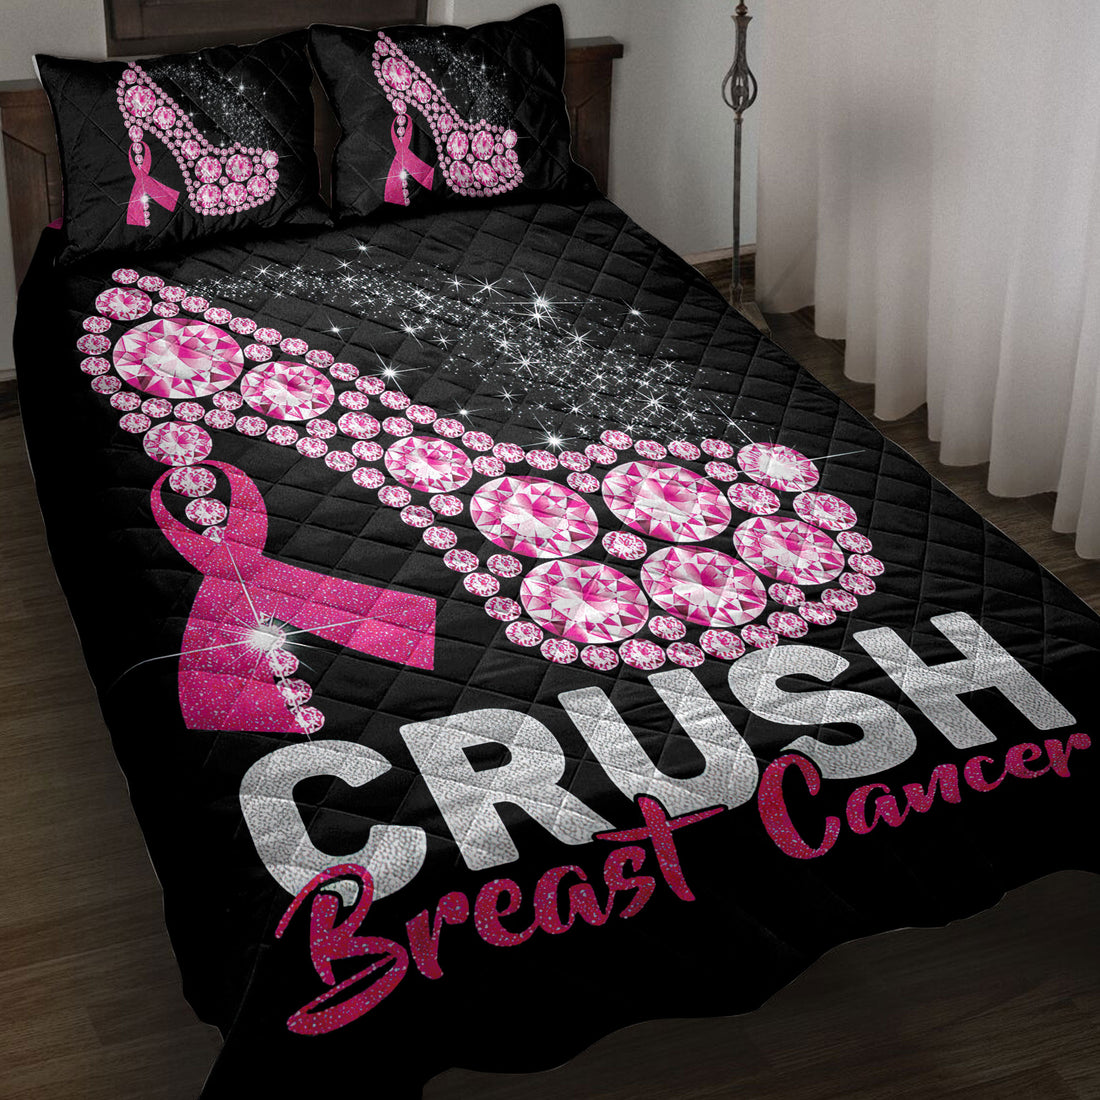 Ohaprints-Quilt-Bed-Set-Pillowcase-Crush-Breast-Cancer-Sparkle-High-Heel-Blanket-Bedspread-Bedding-3837-Throw (55'' x 60'')